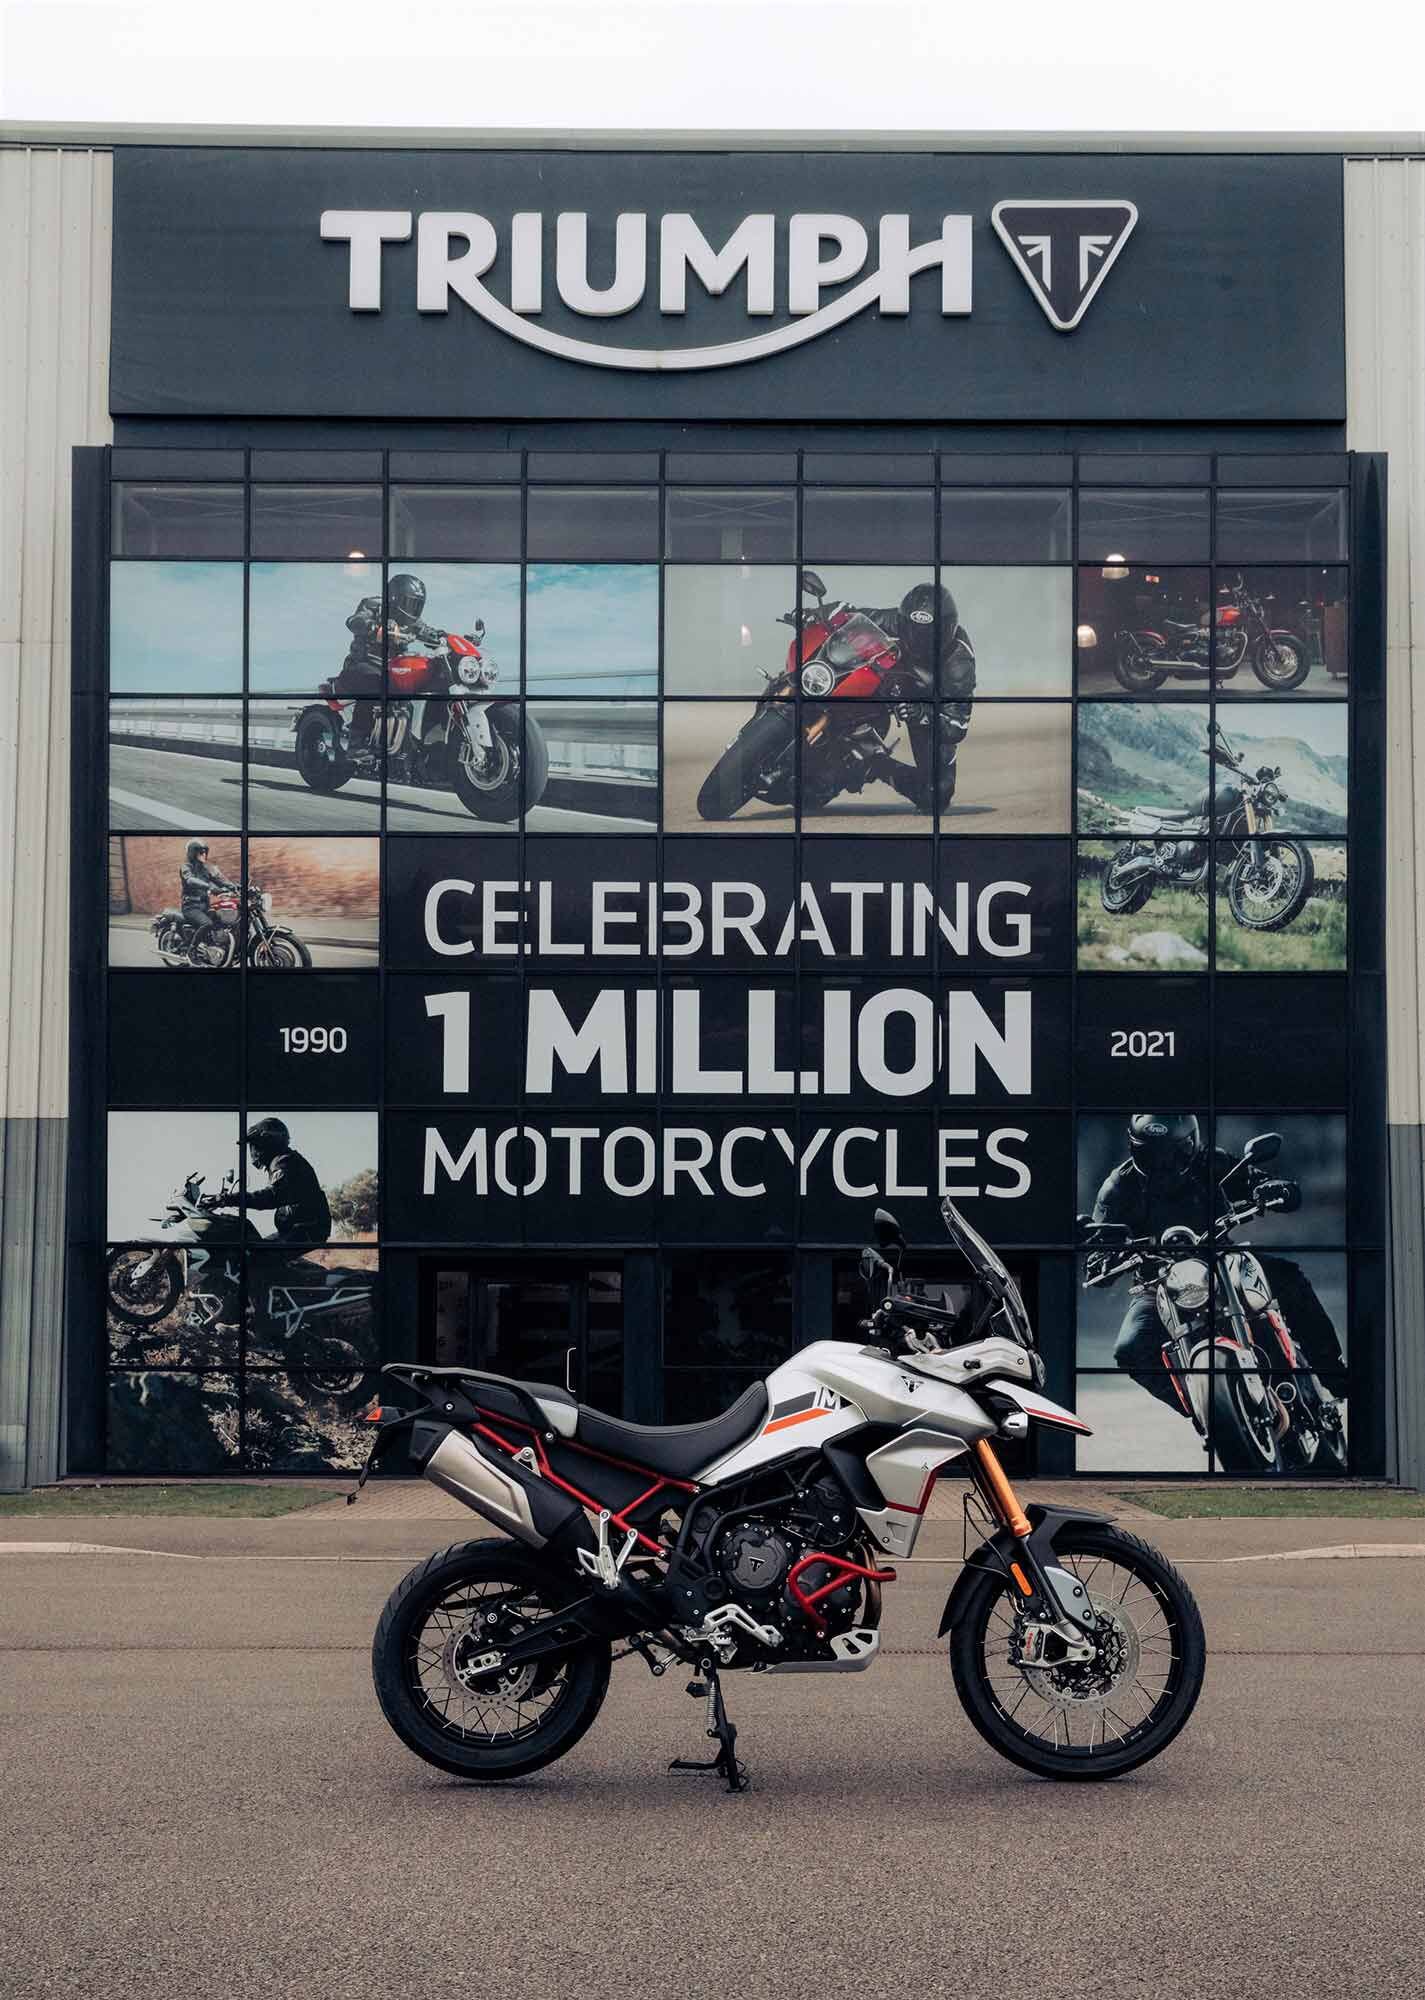 The millionth bike was feted at the Triumph HQ in Hinckley. The bike will be displayed prior to the 120th anniversary celebrations Triumph is planning.